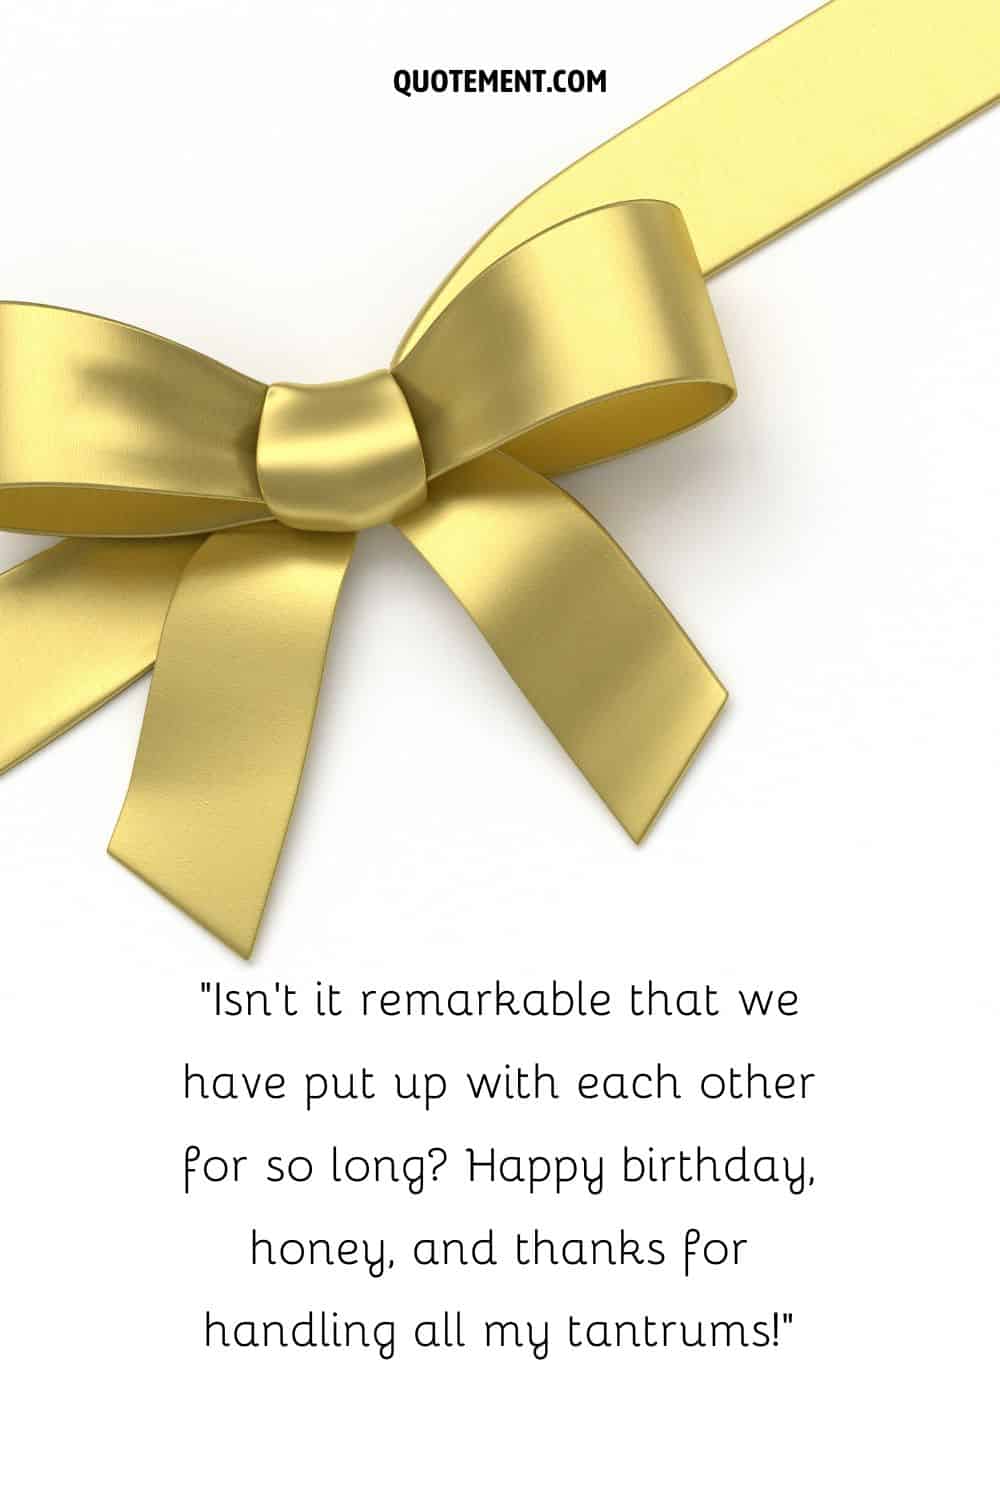 golden ribbon image representing a 68th birthday wish for a spouse
